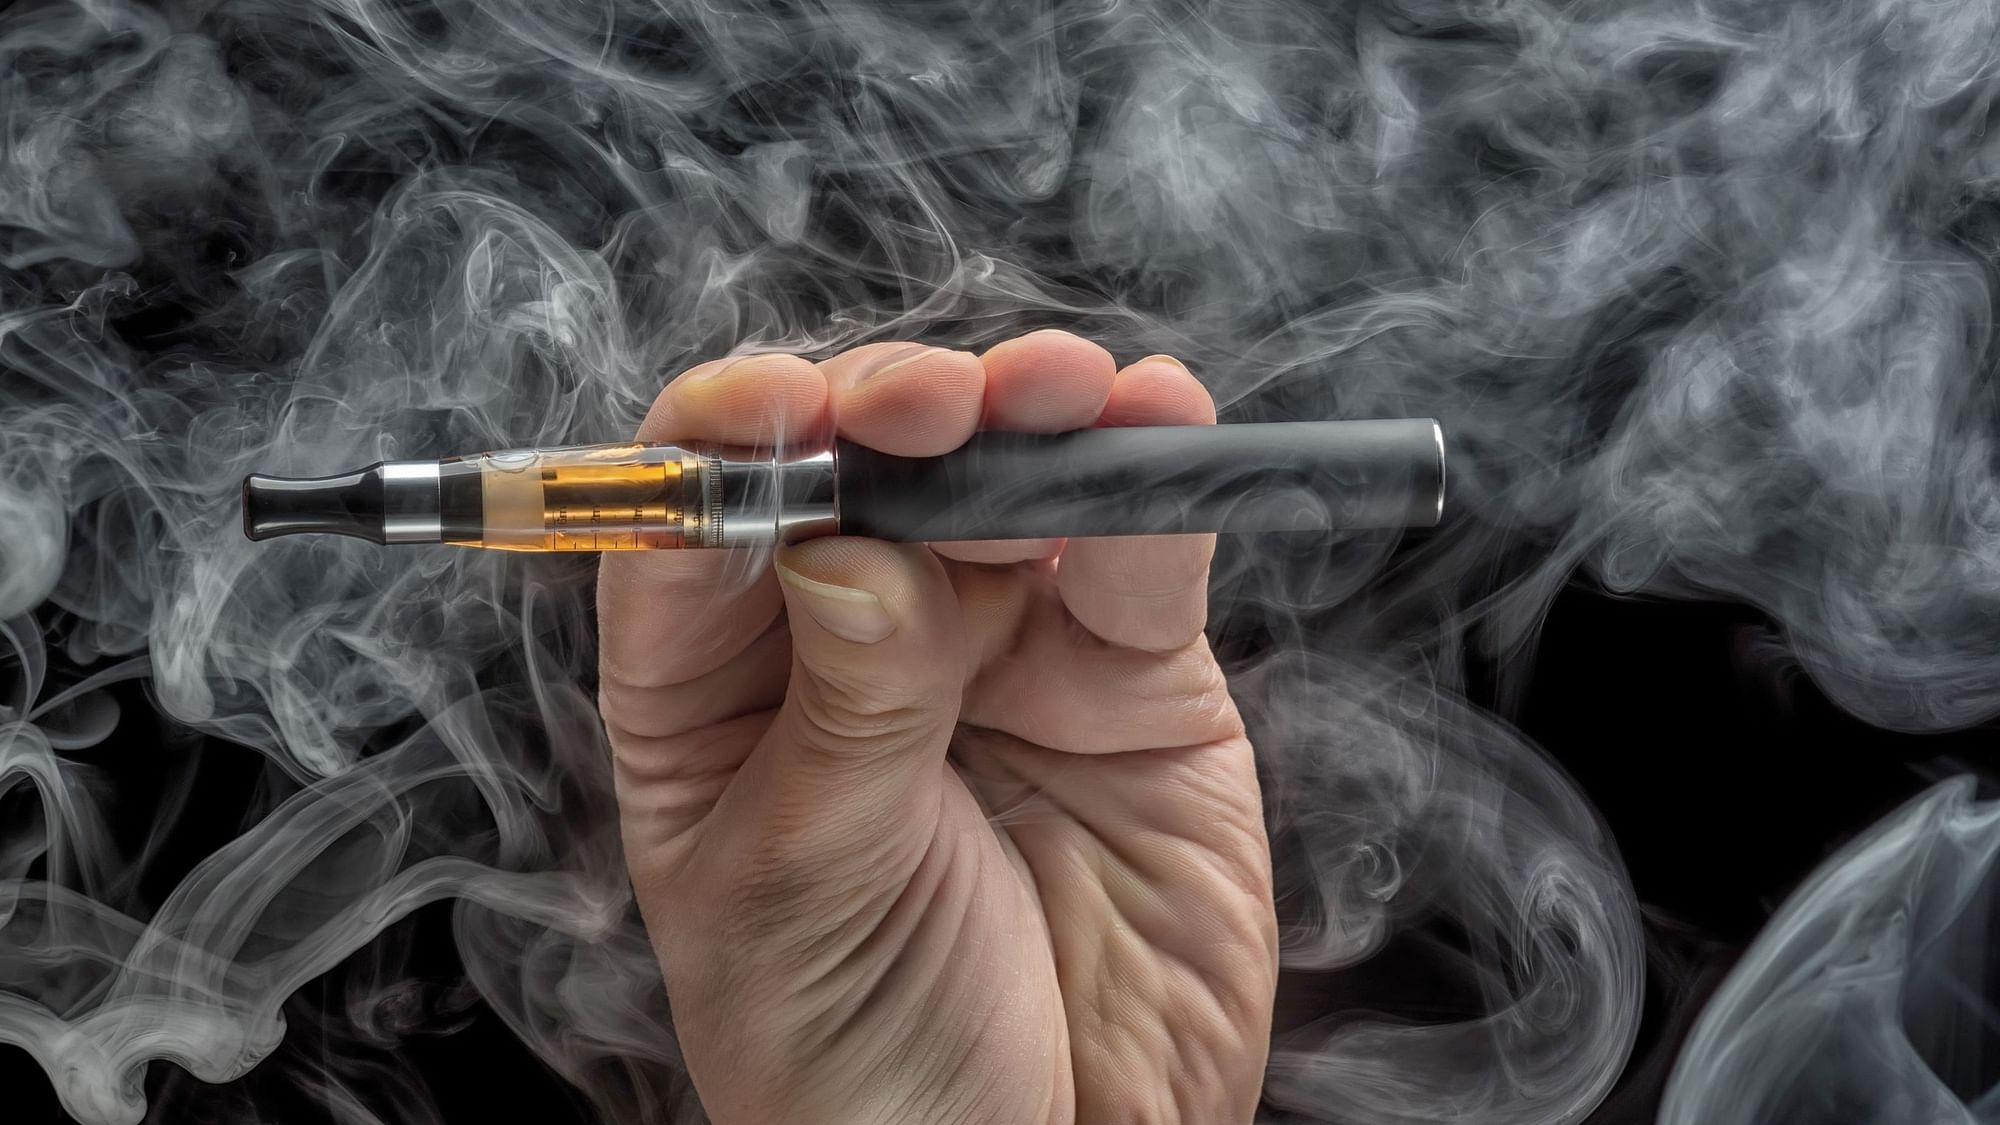 Vaping may increase oral infections and inflammation risks, study.